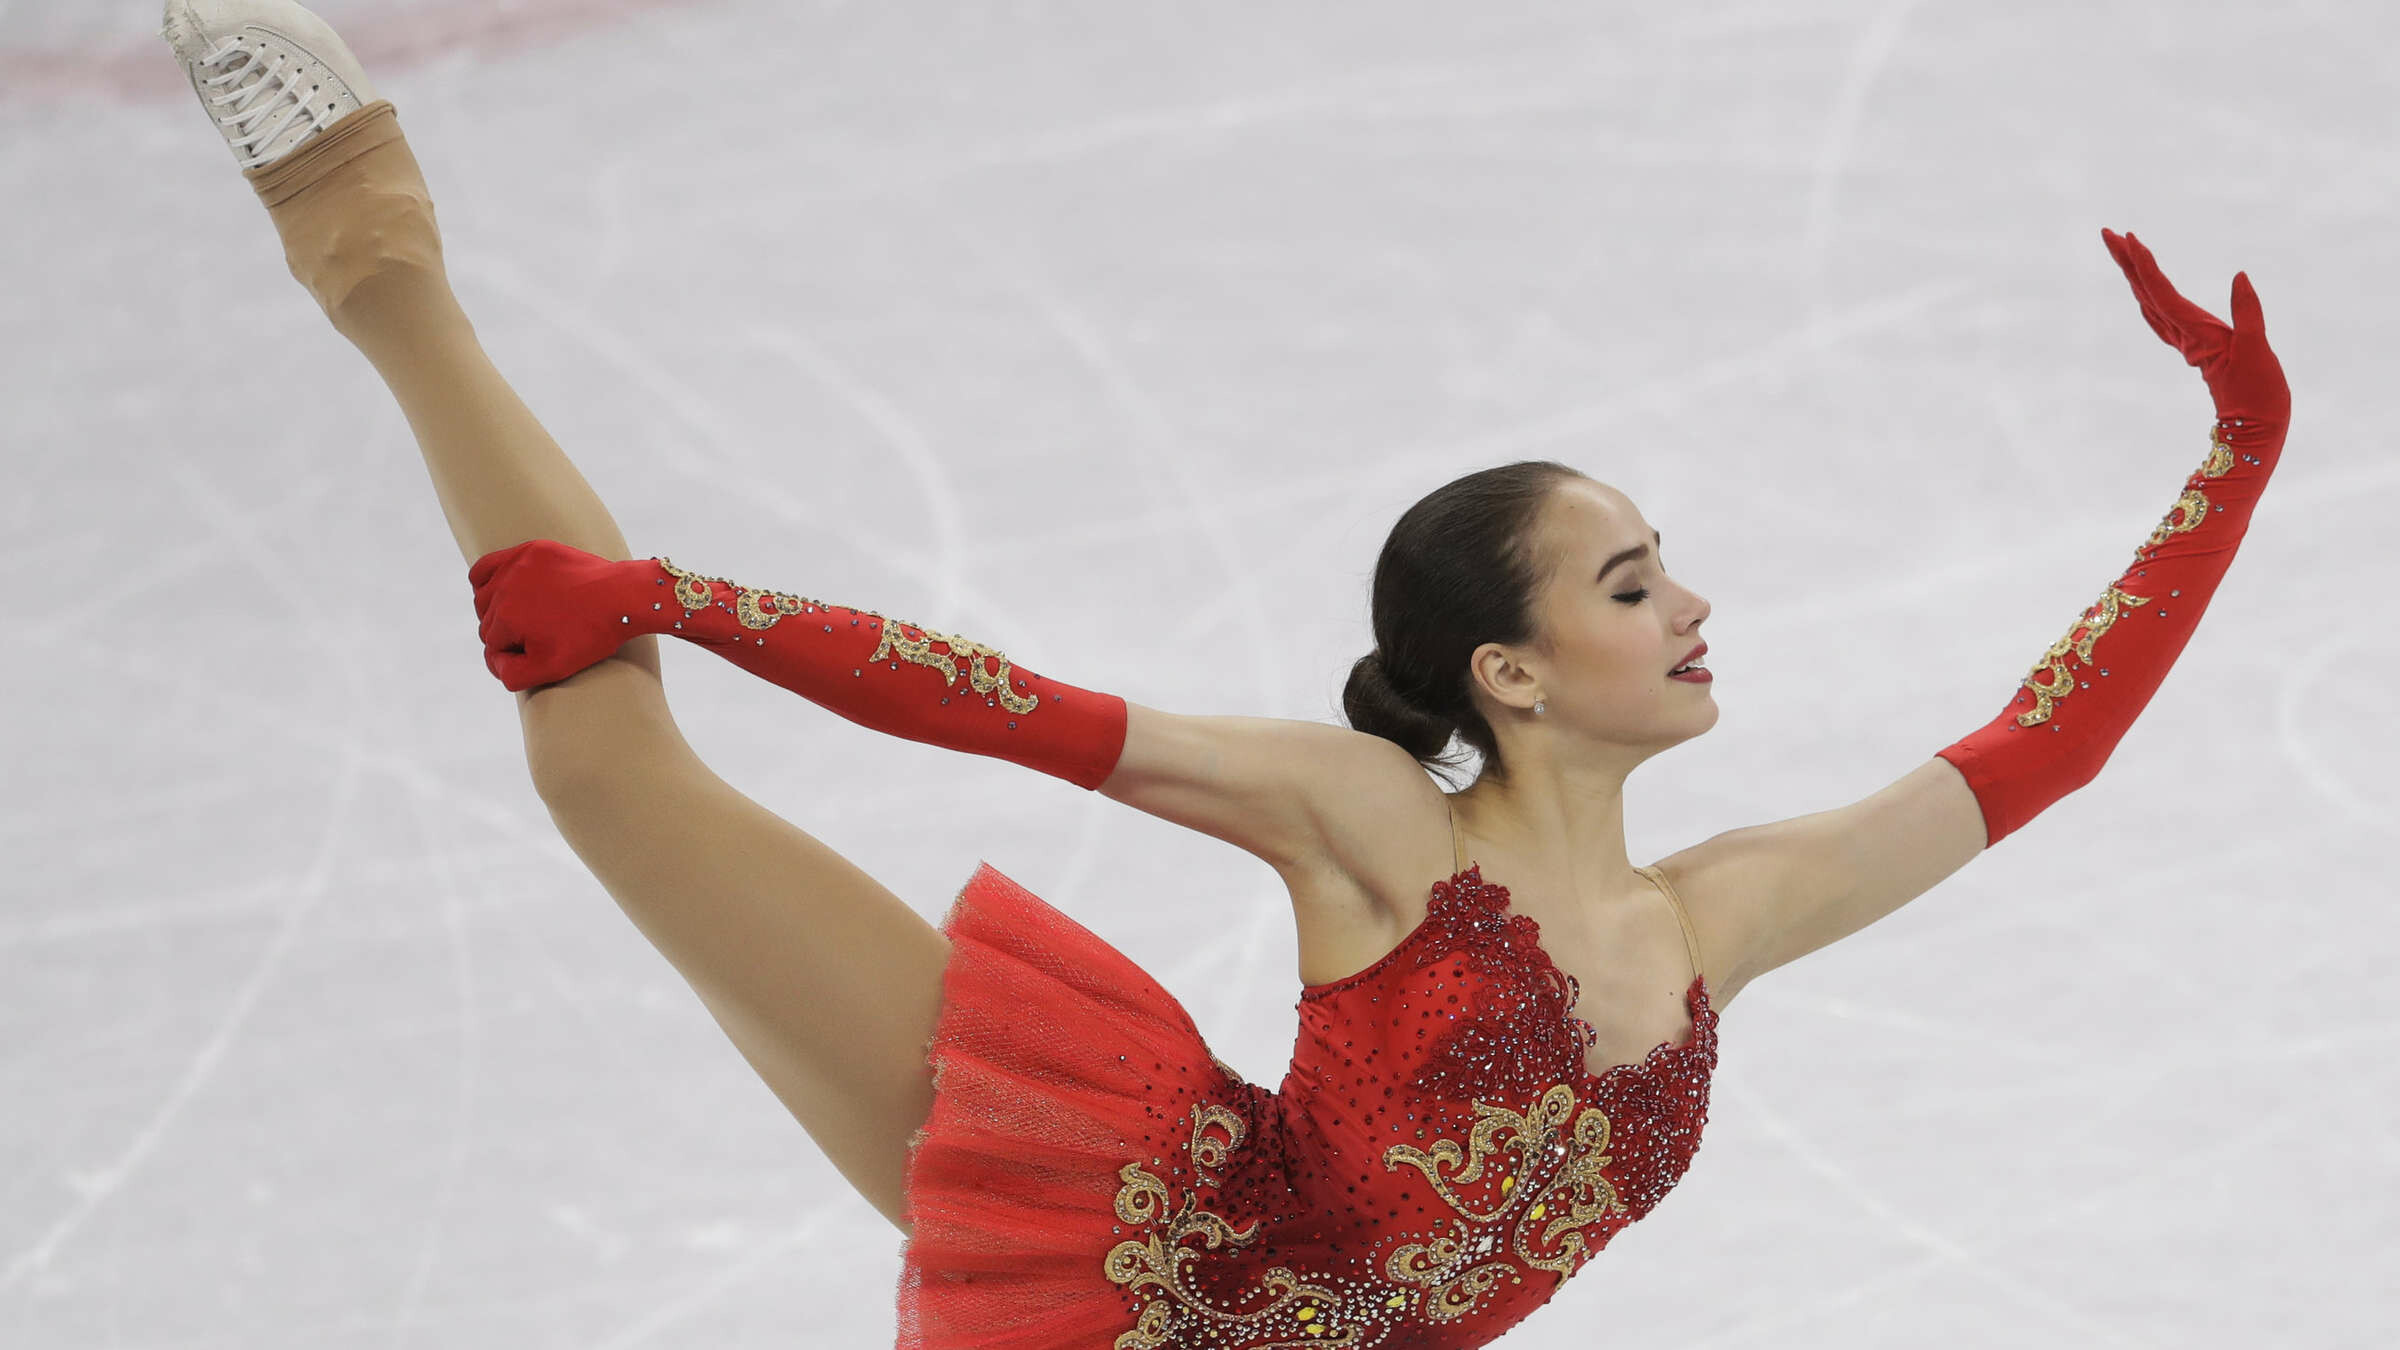 Alina Zagitova: She became the first junior lady to achieve a total score above the 200 mark in figure skating. 2400x1350 HD Wallpaper.